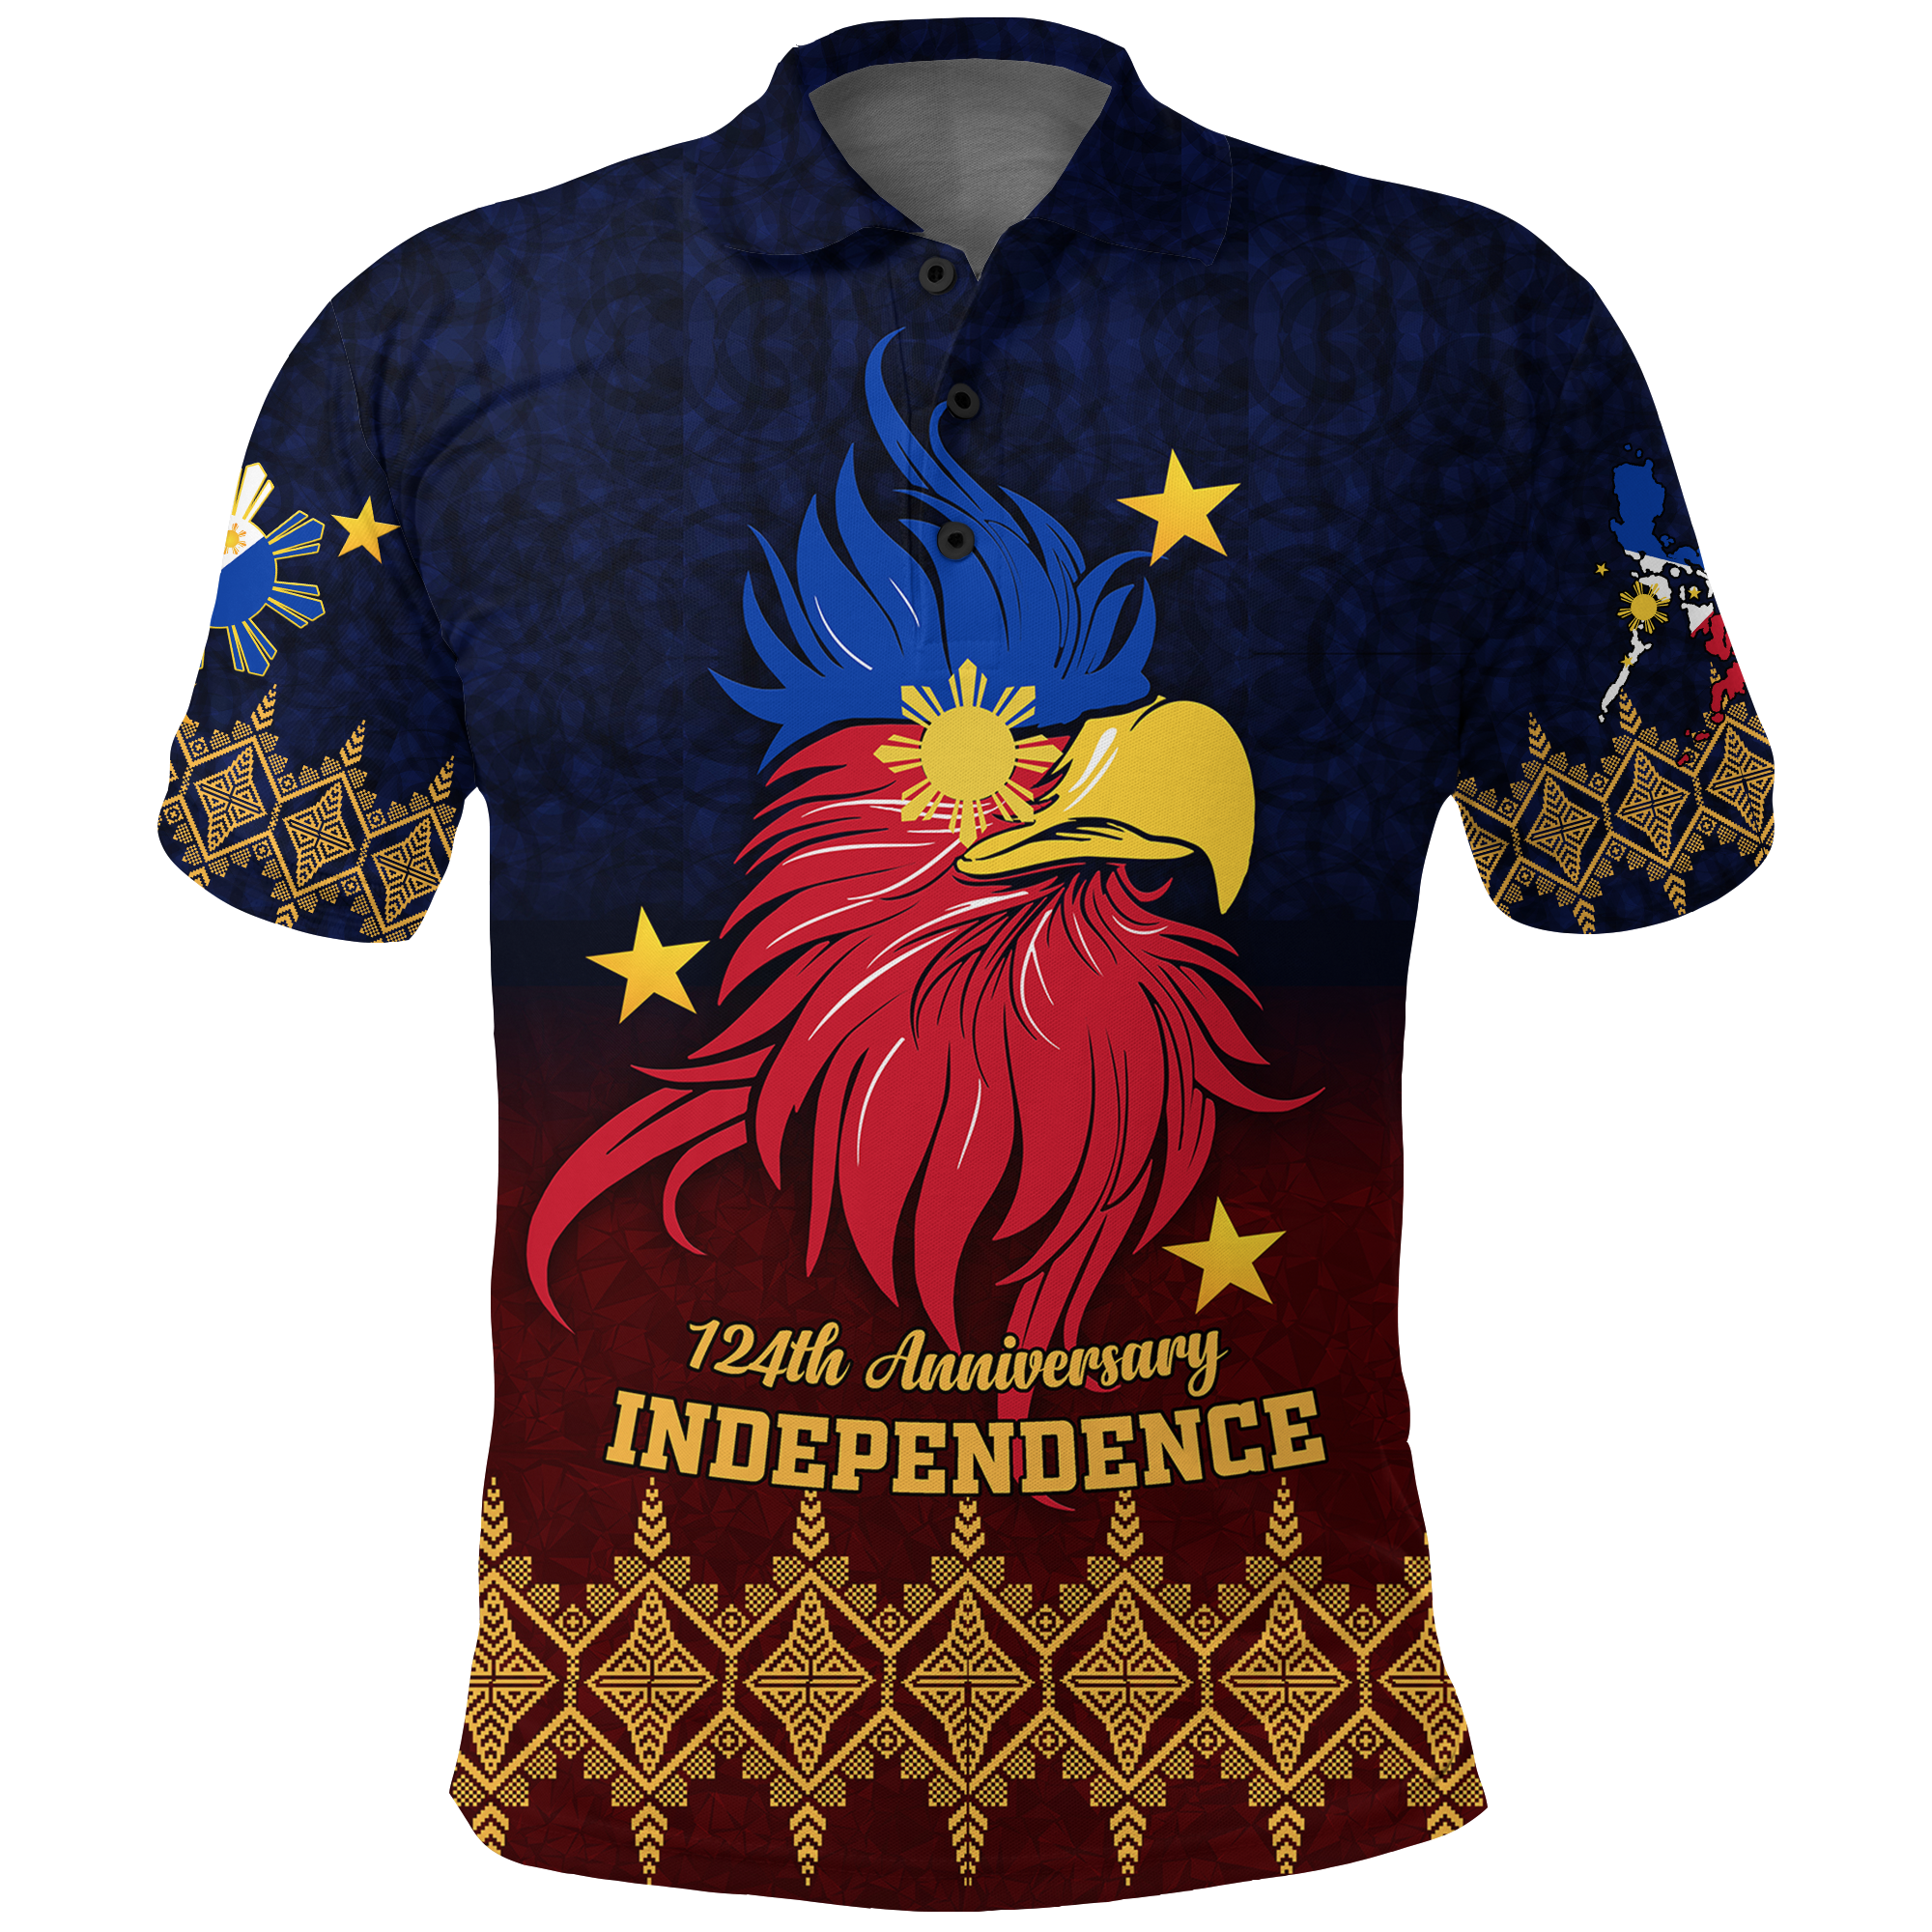 The Philippines Independence Anniversary 124th Years Polo Shirt LT12 Unisex Blue - Polynesian Pride